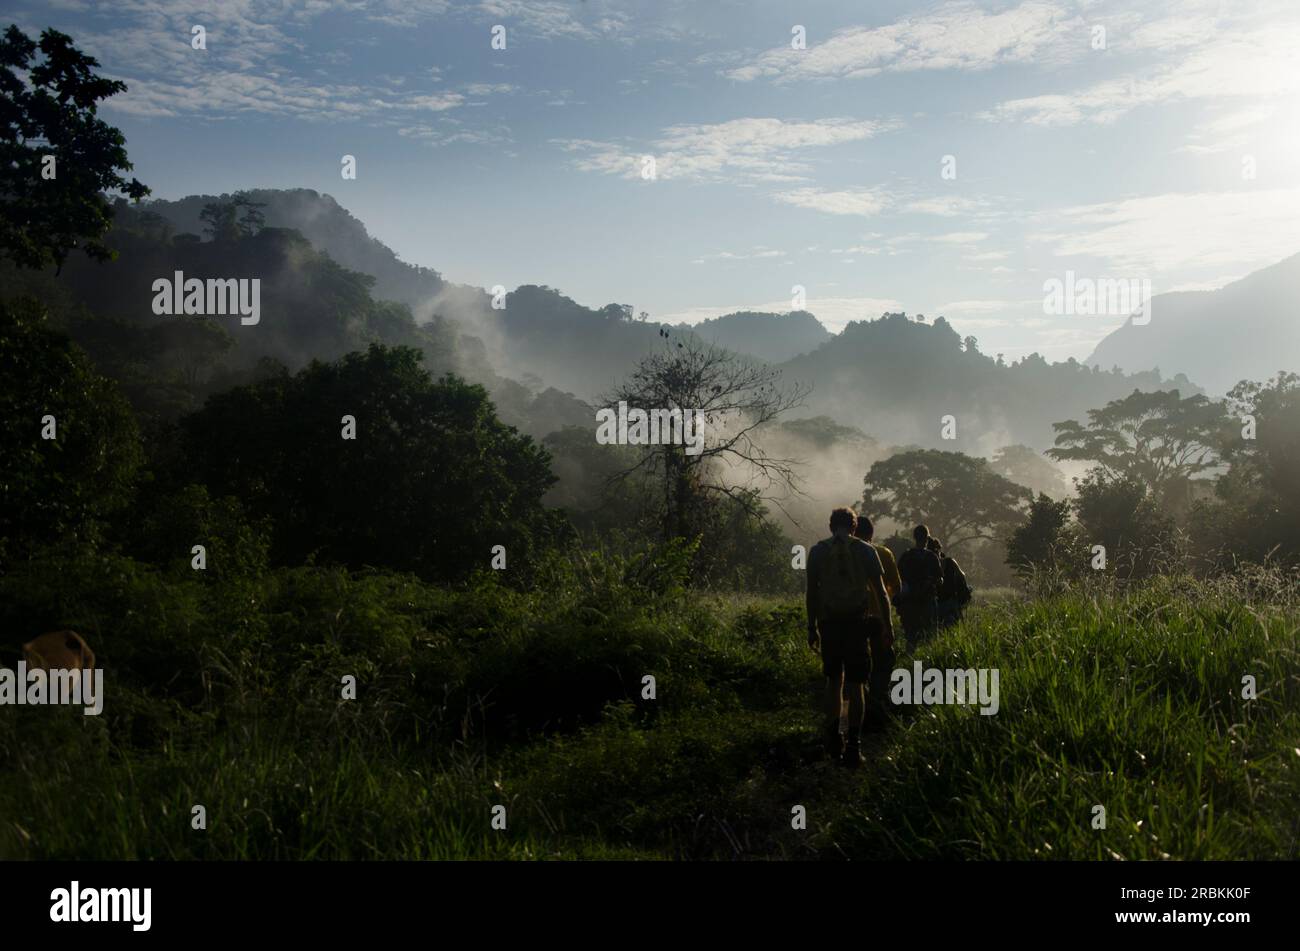 A morning hike through a foggy jungle in colombia Stock Photo